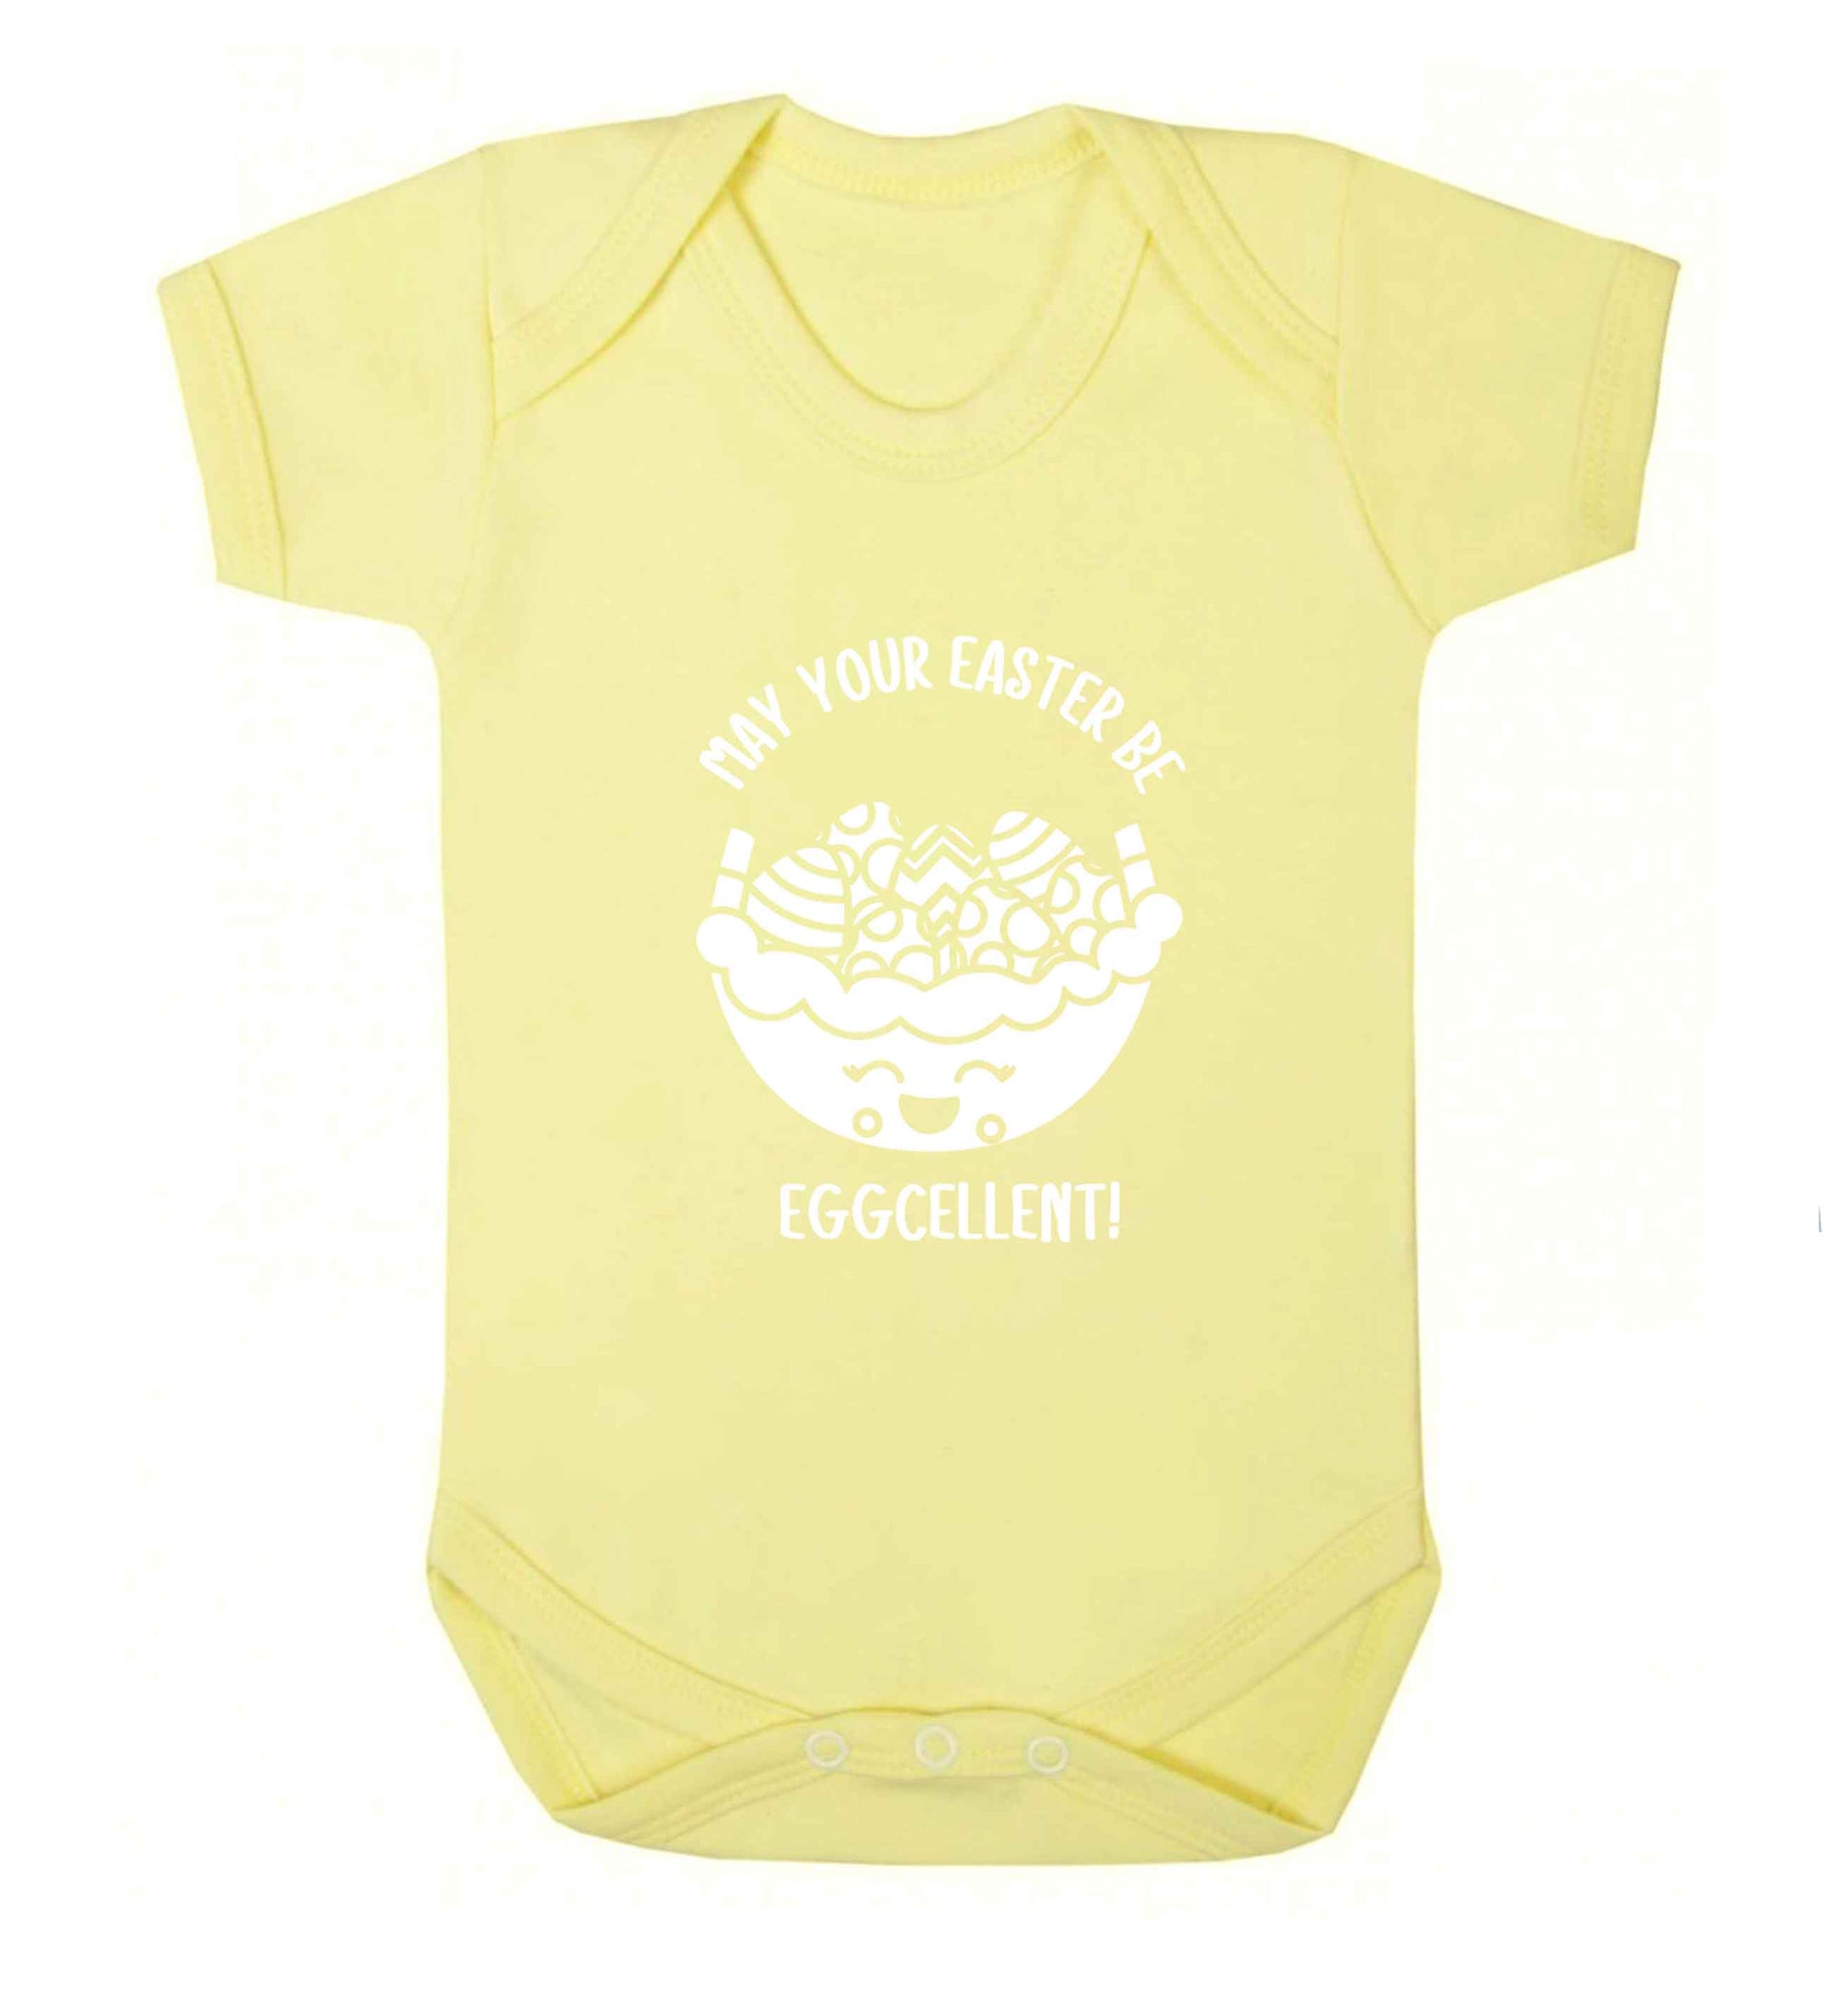 May your Easter be eggcellent baby vest pale yellow 18-24 months